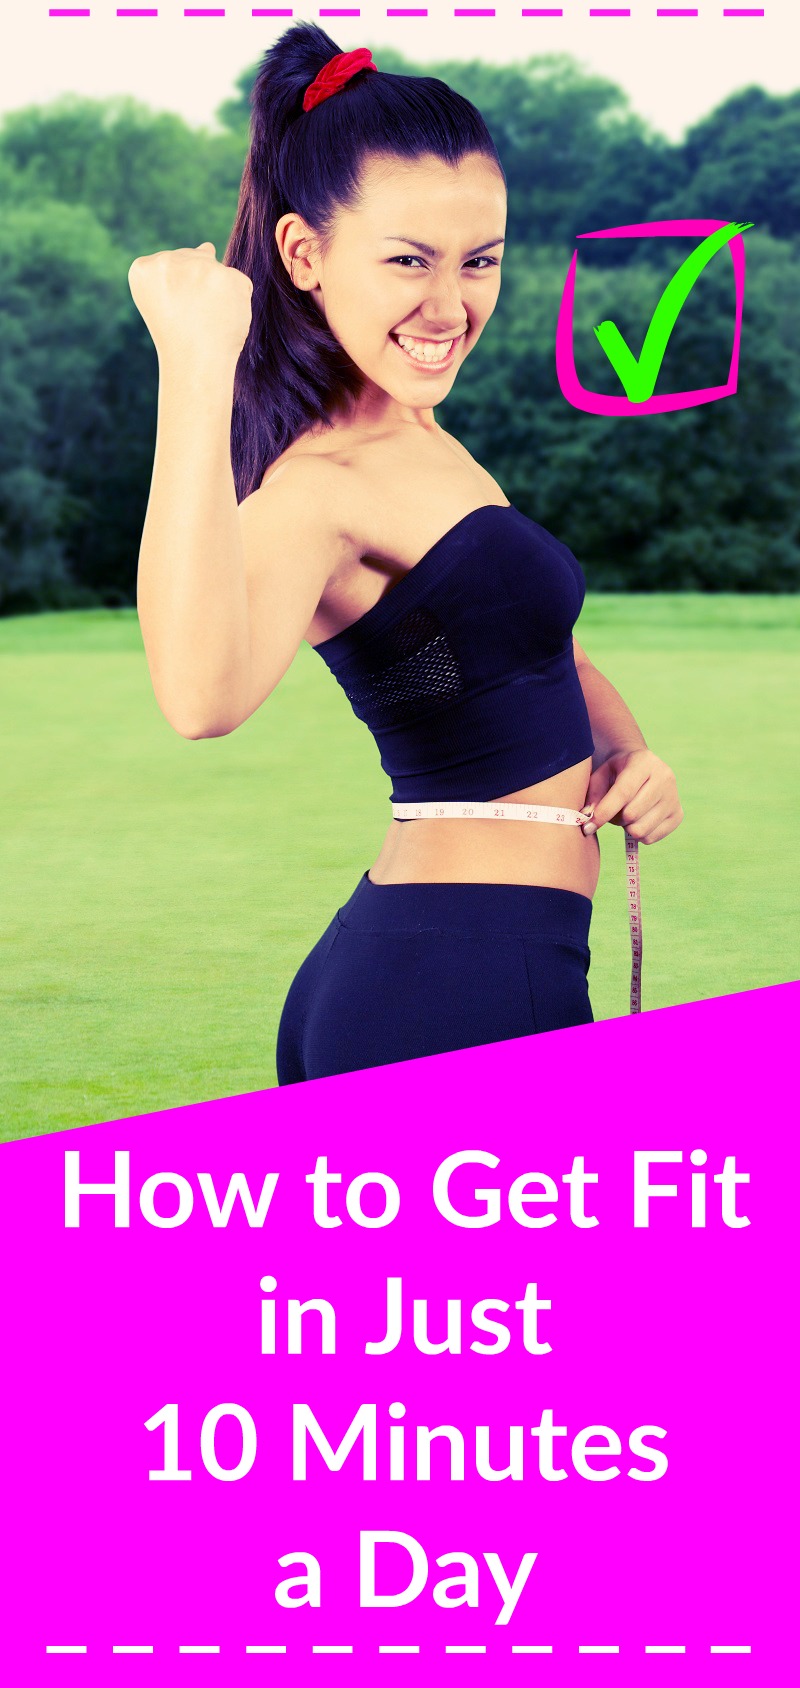 Get Fit in Just 10 Minutes